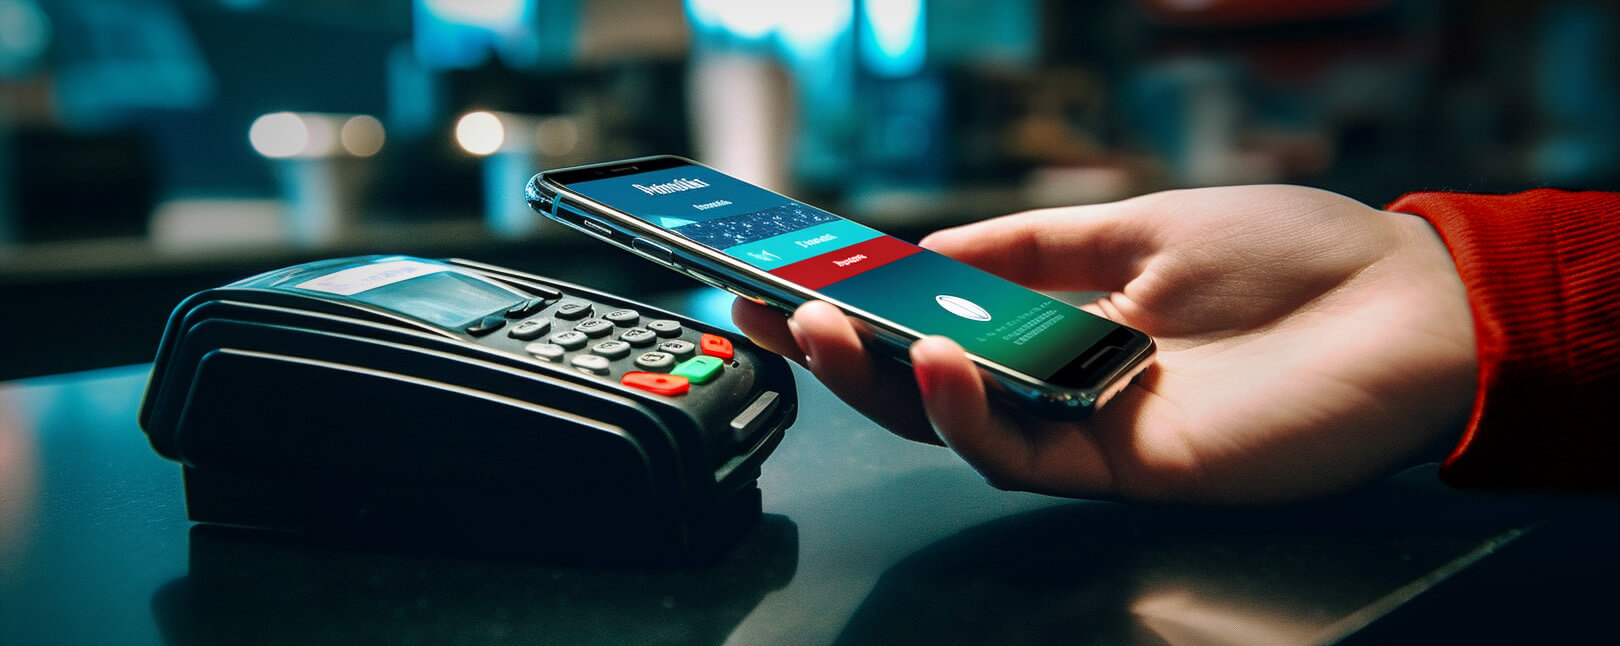 nfc-devices-must-be-how-close-to-one-another-for-effective-communication-to-occur